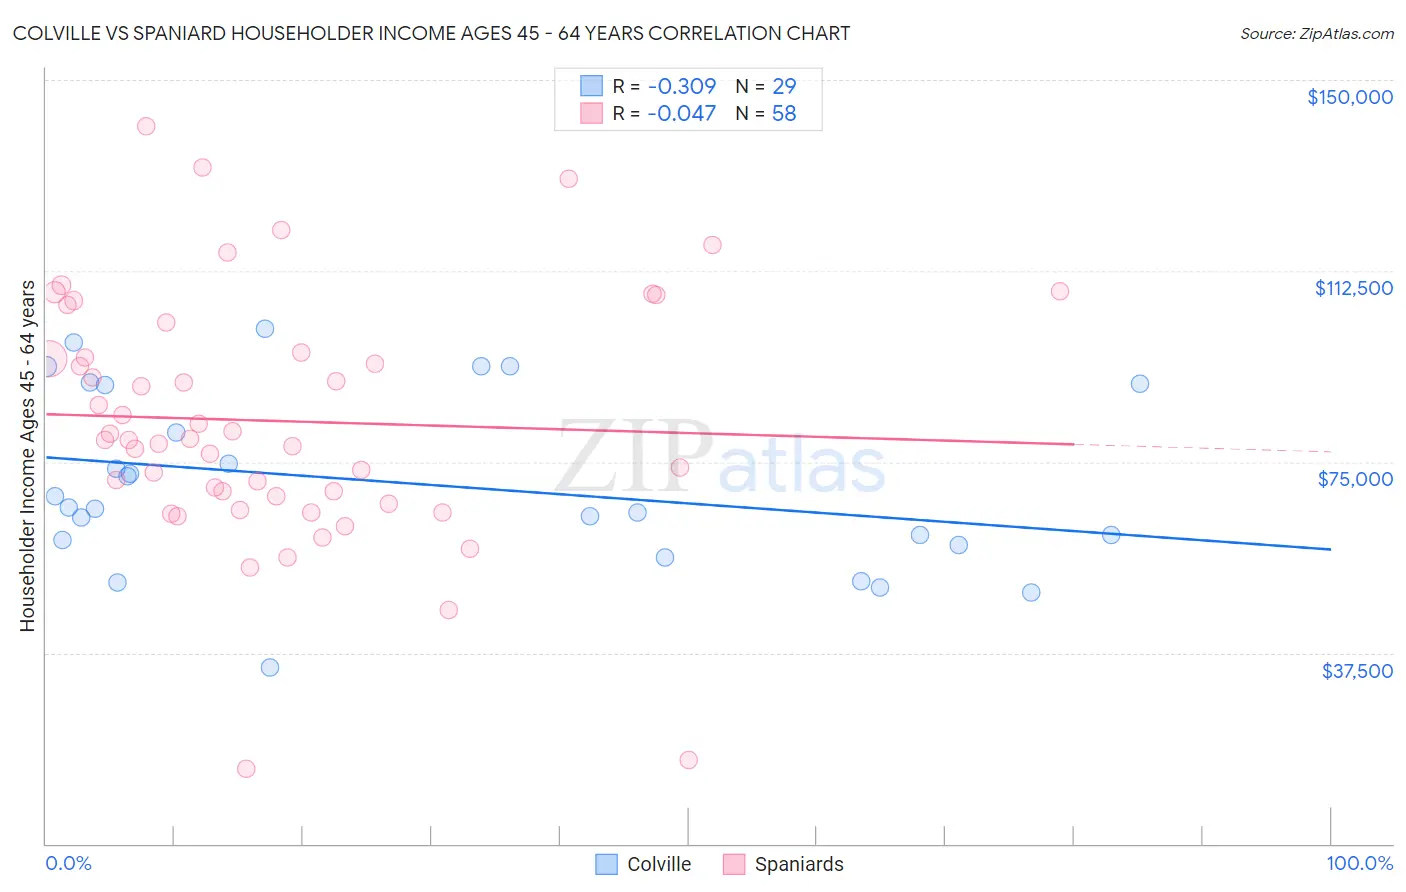 Colville vs Spaniard Householder Income Ages 45 - 64 years